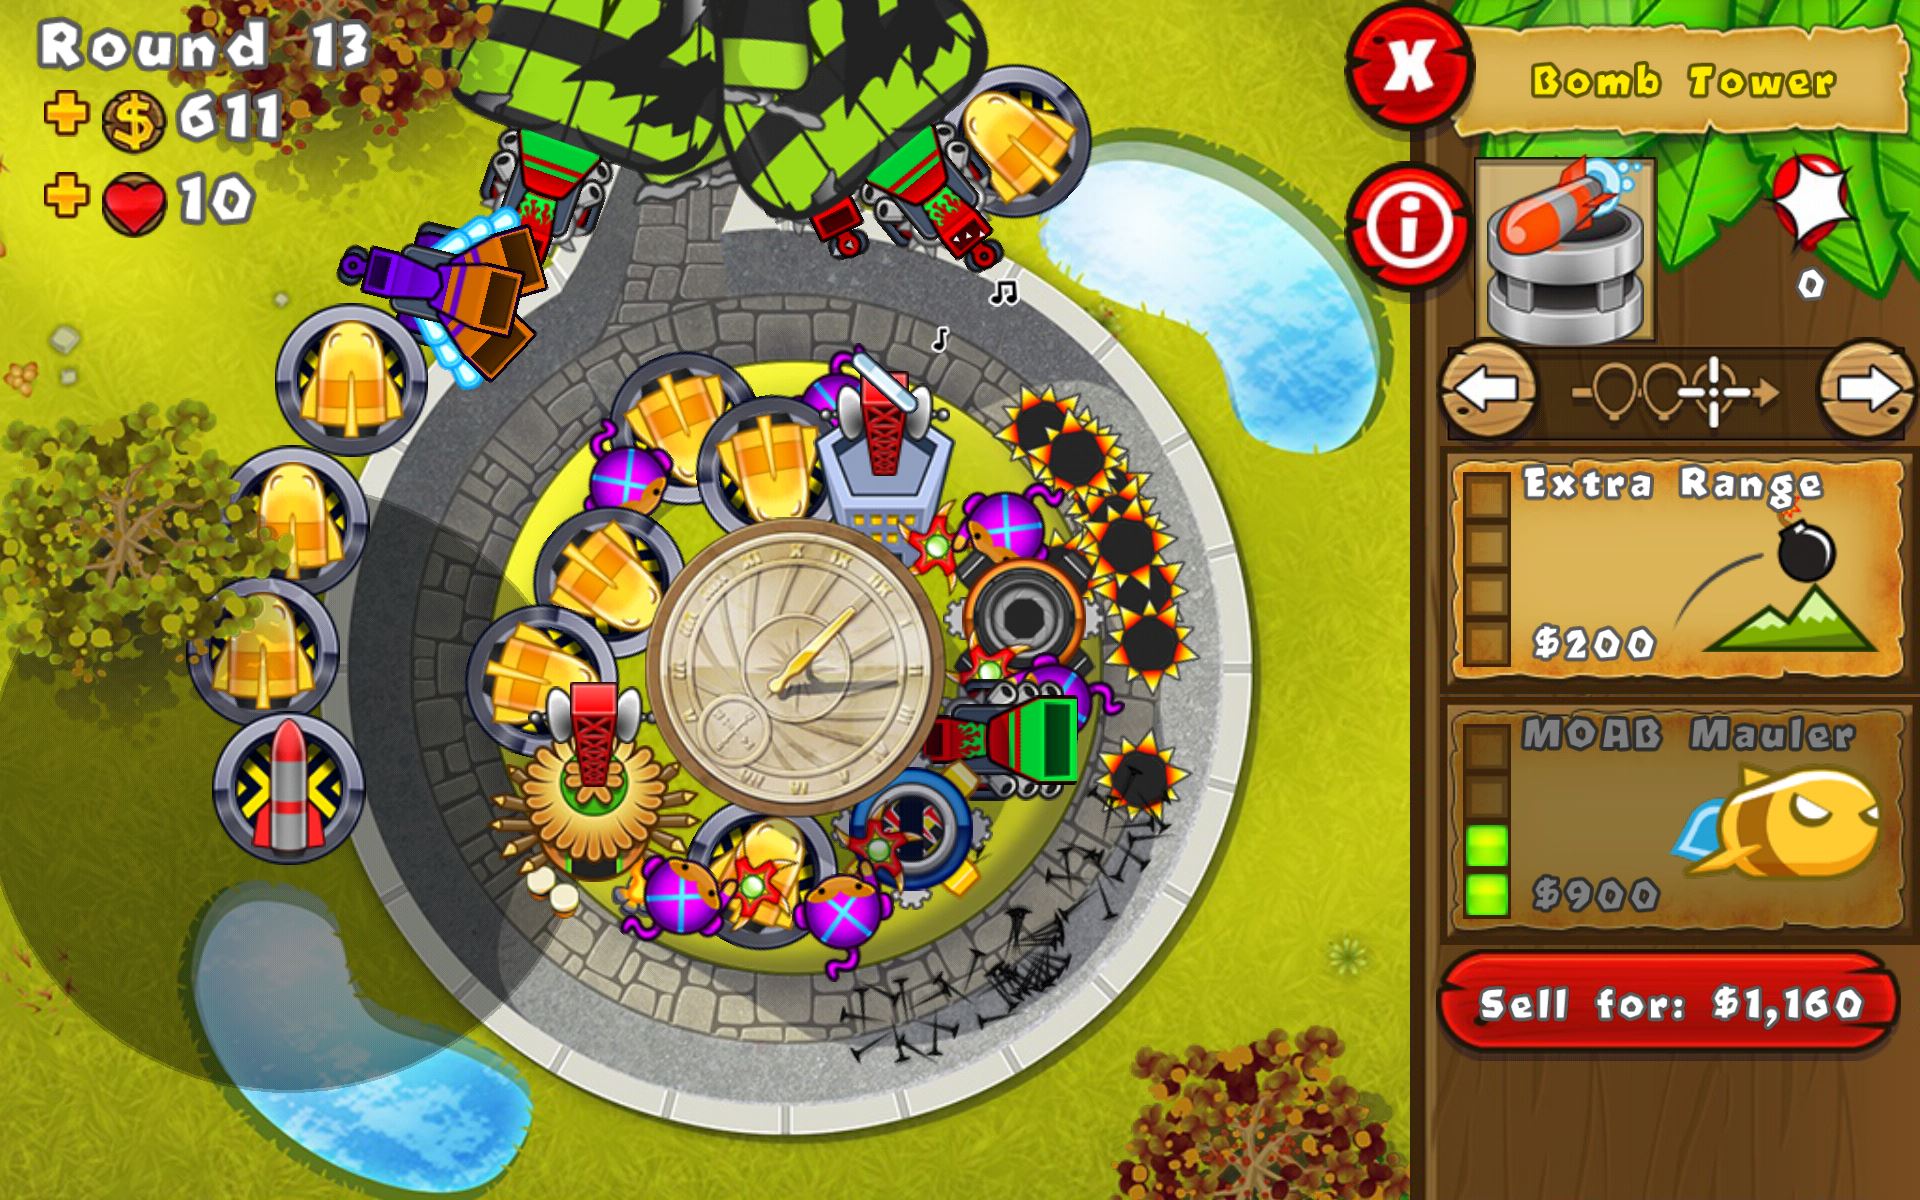 bloons td 5 trophy guide